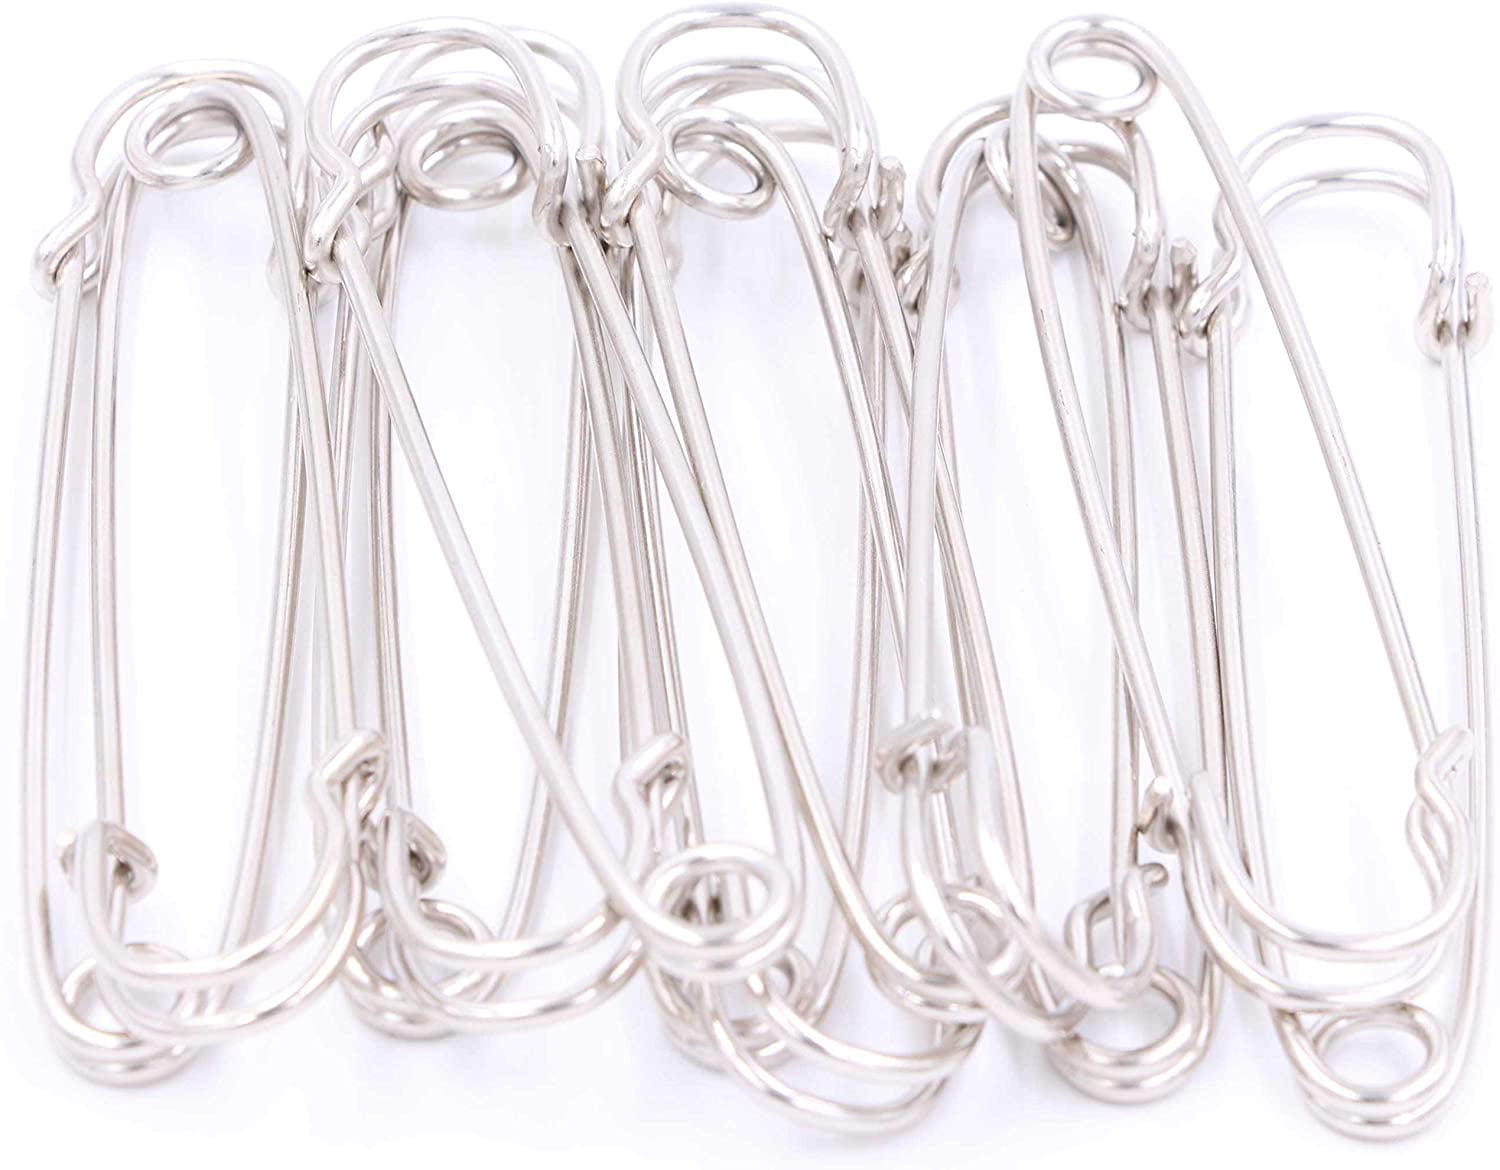 Honbay 20PCS 3Inch Heavy Duty Extra Large Safety Pins for Blankets, Skirts,  Kilts, Crafts (Silver)